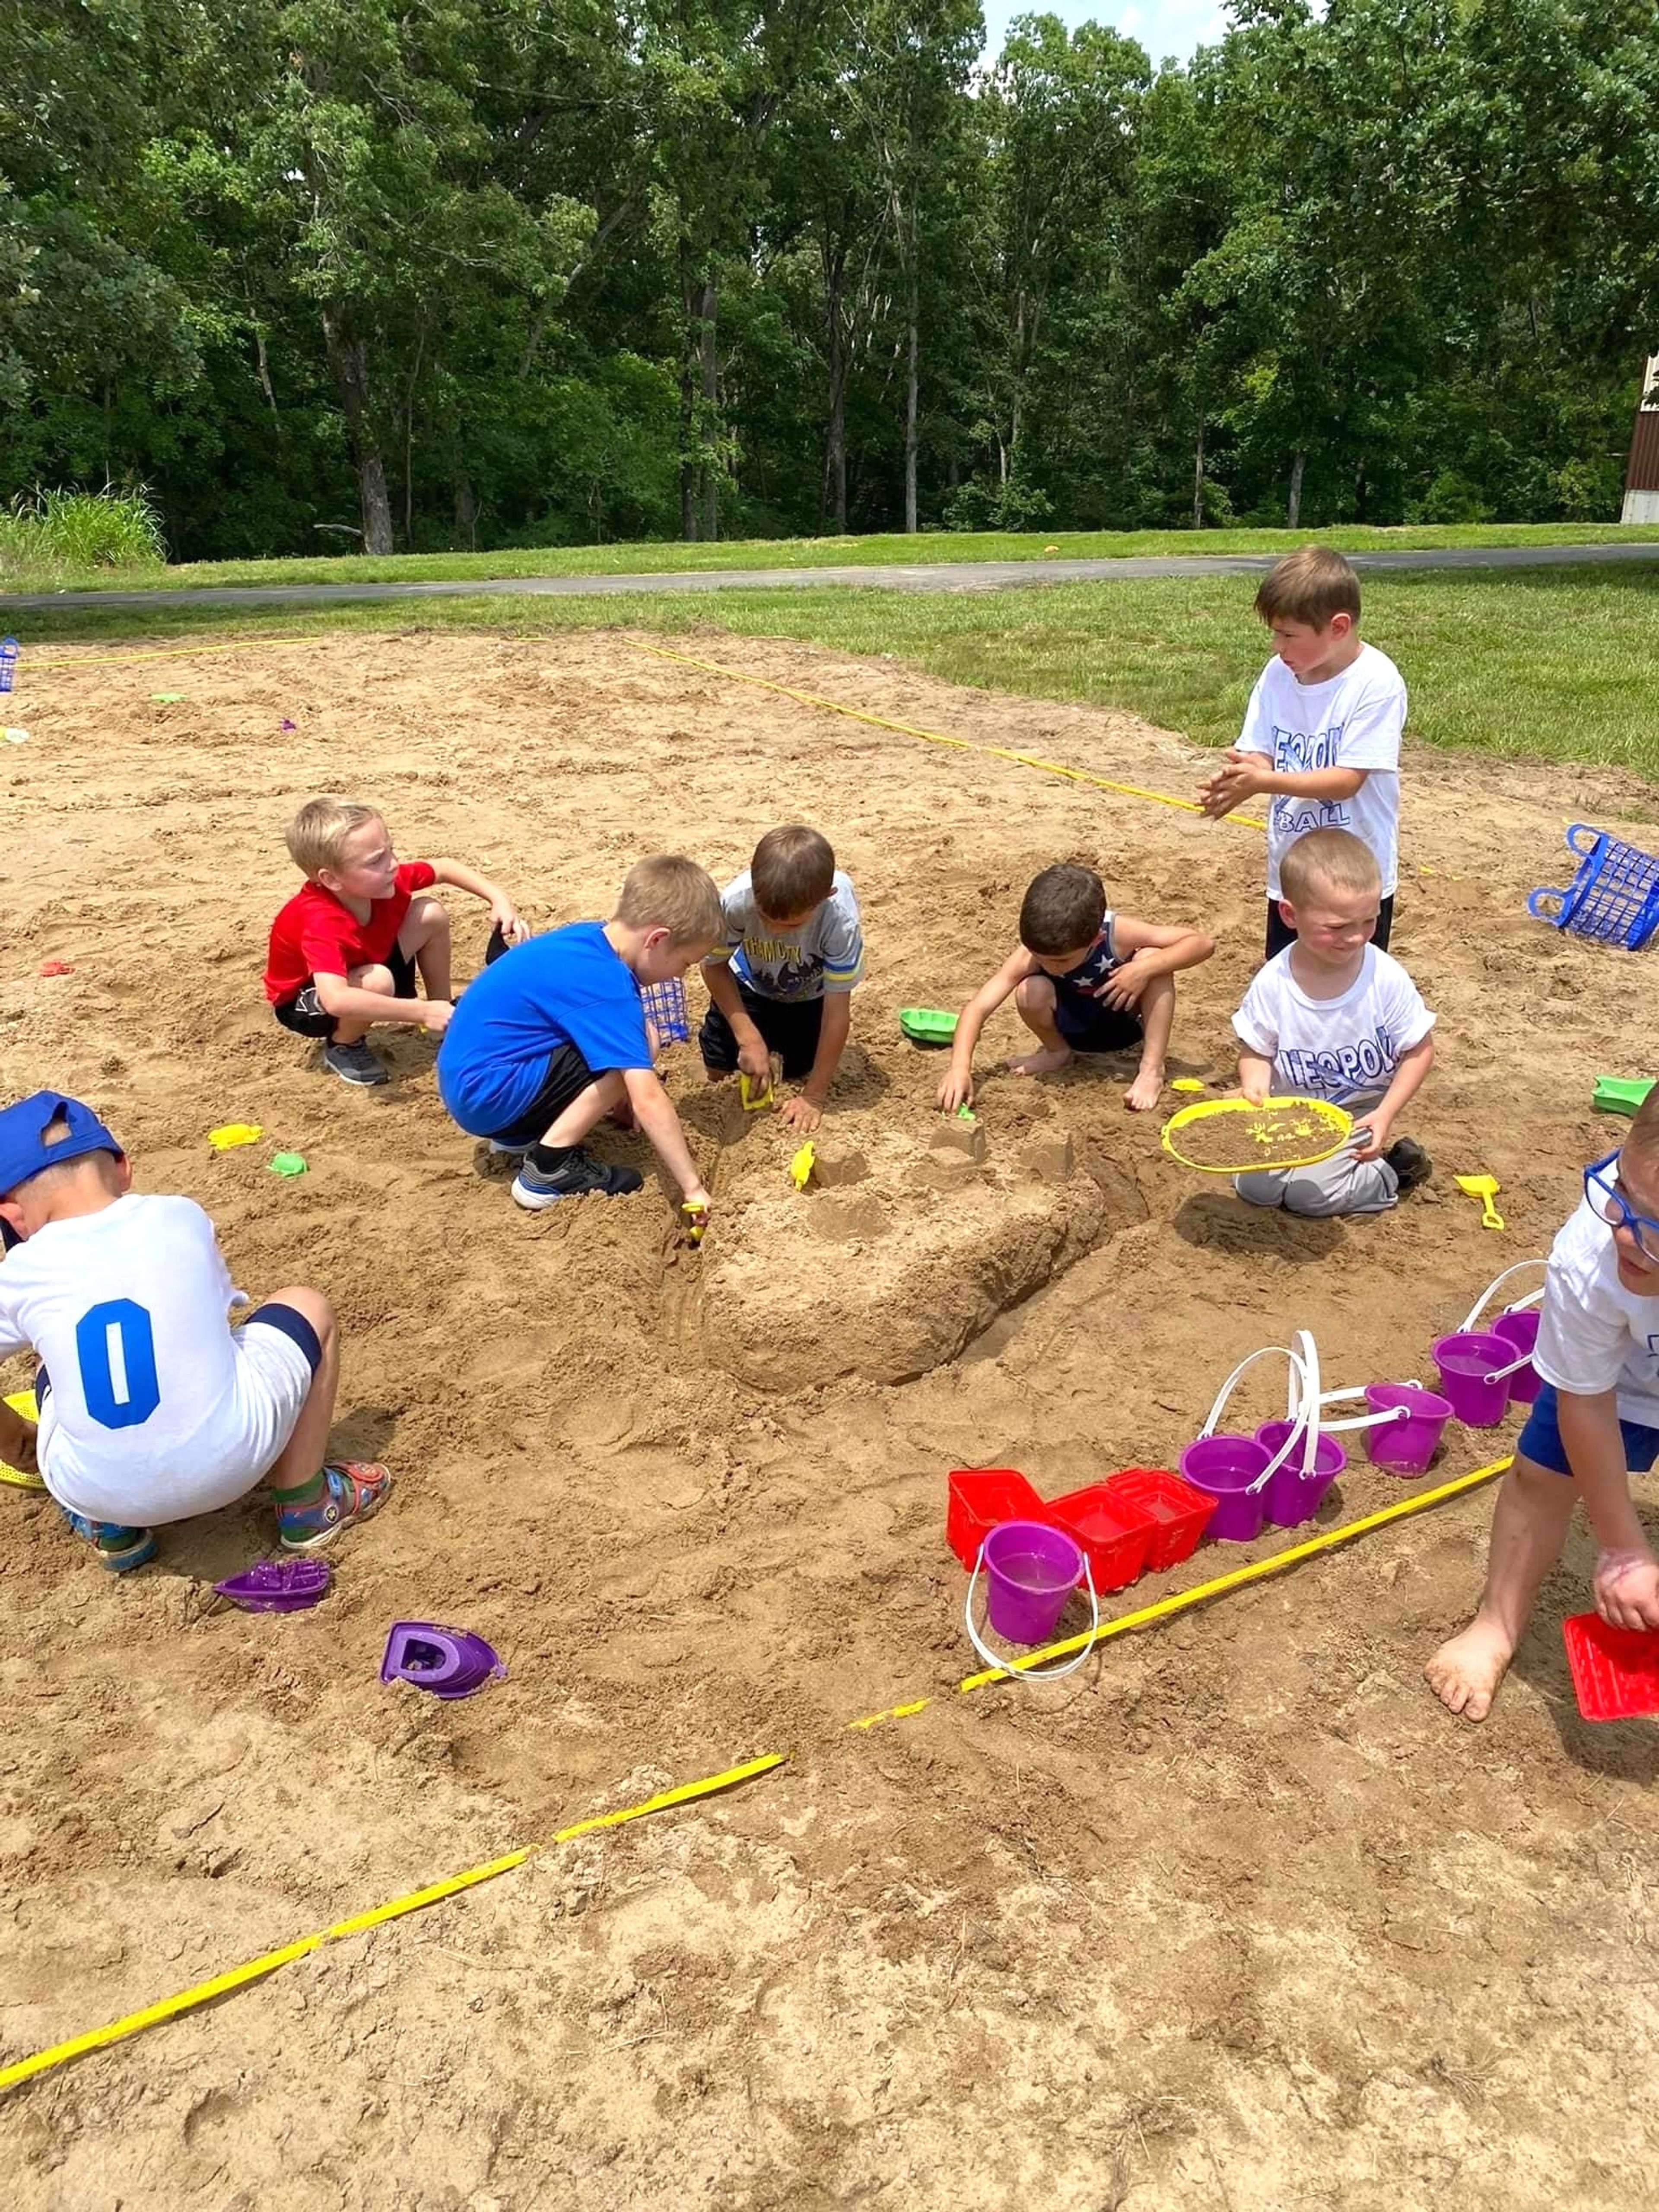 
Several children take advantage of the sand toys and work together to build a sand castle masterpiece.